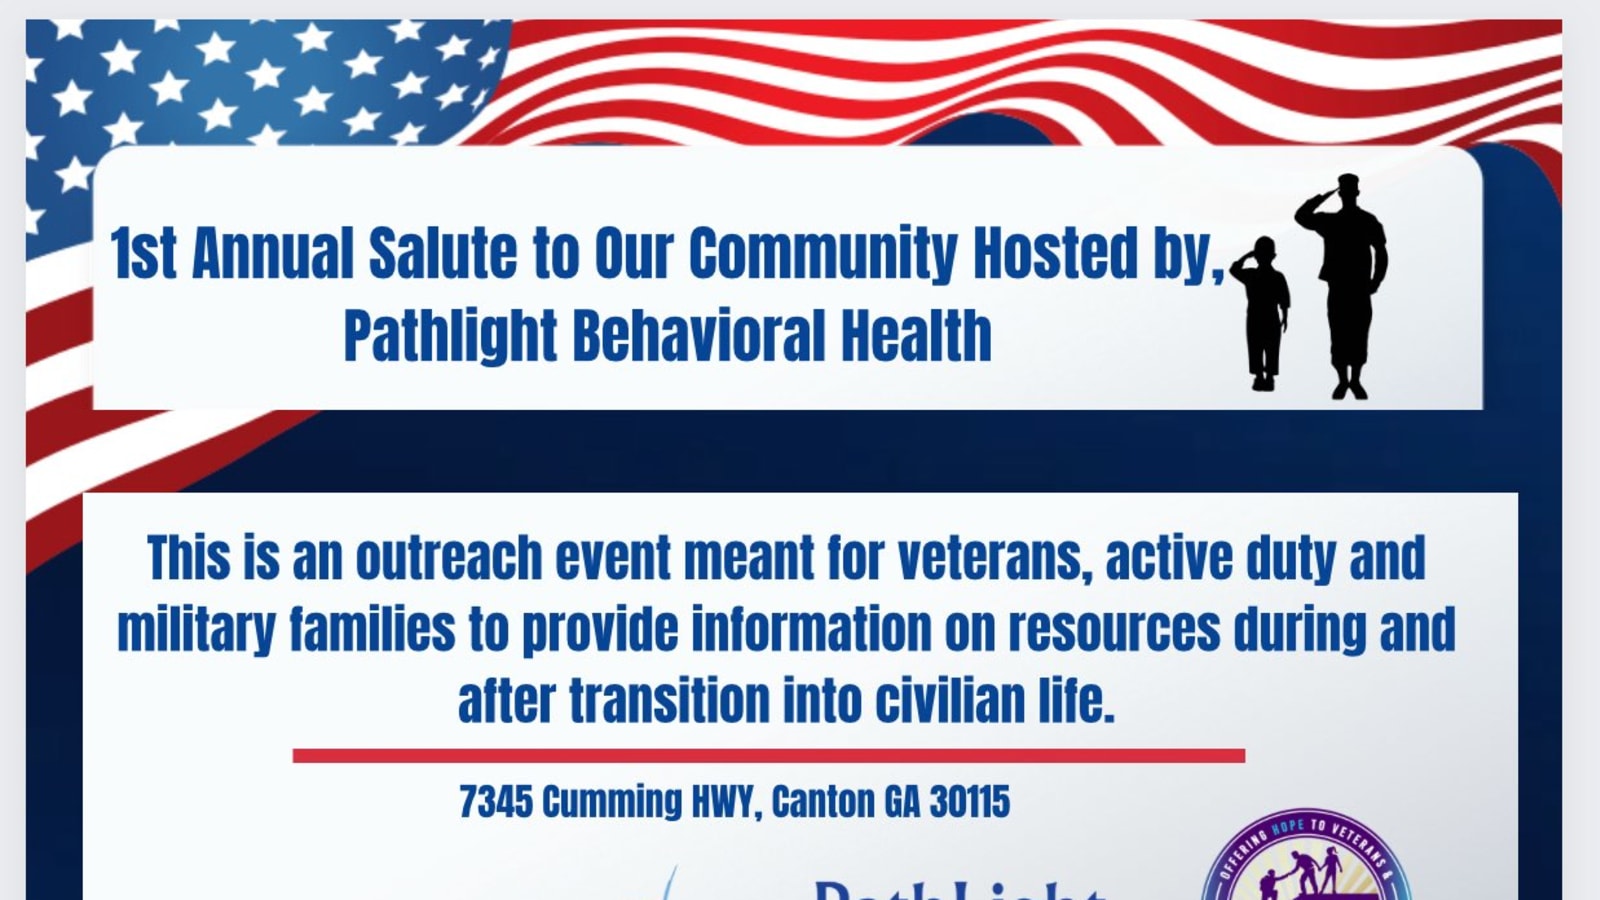 1st Annual Salute to Our Community